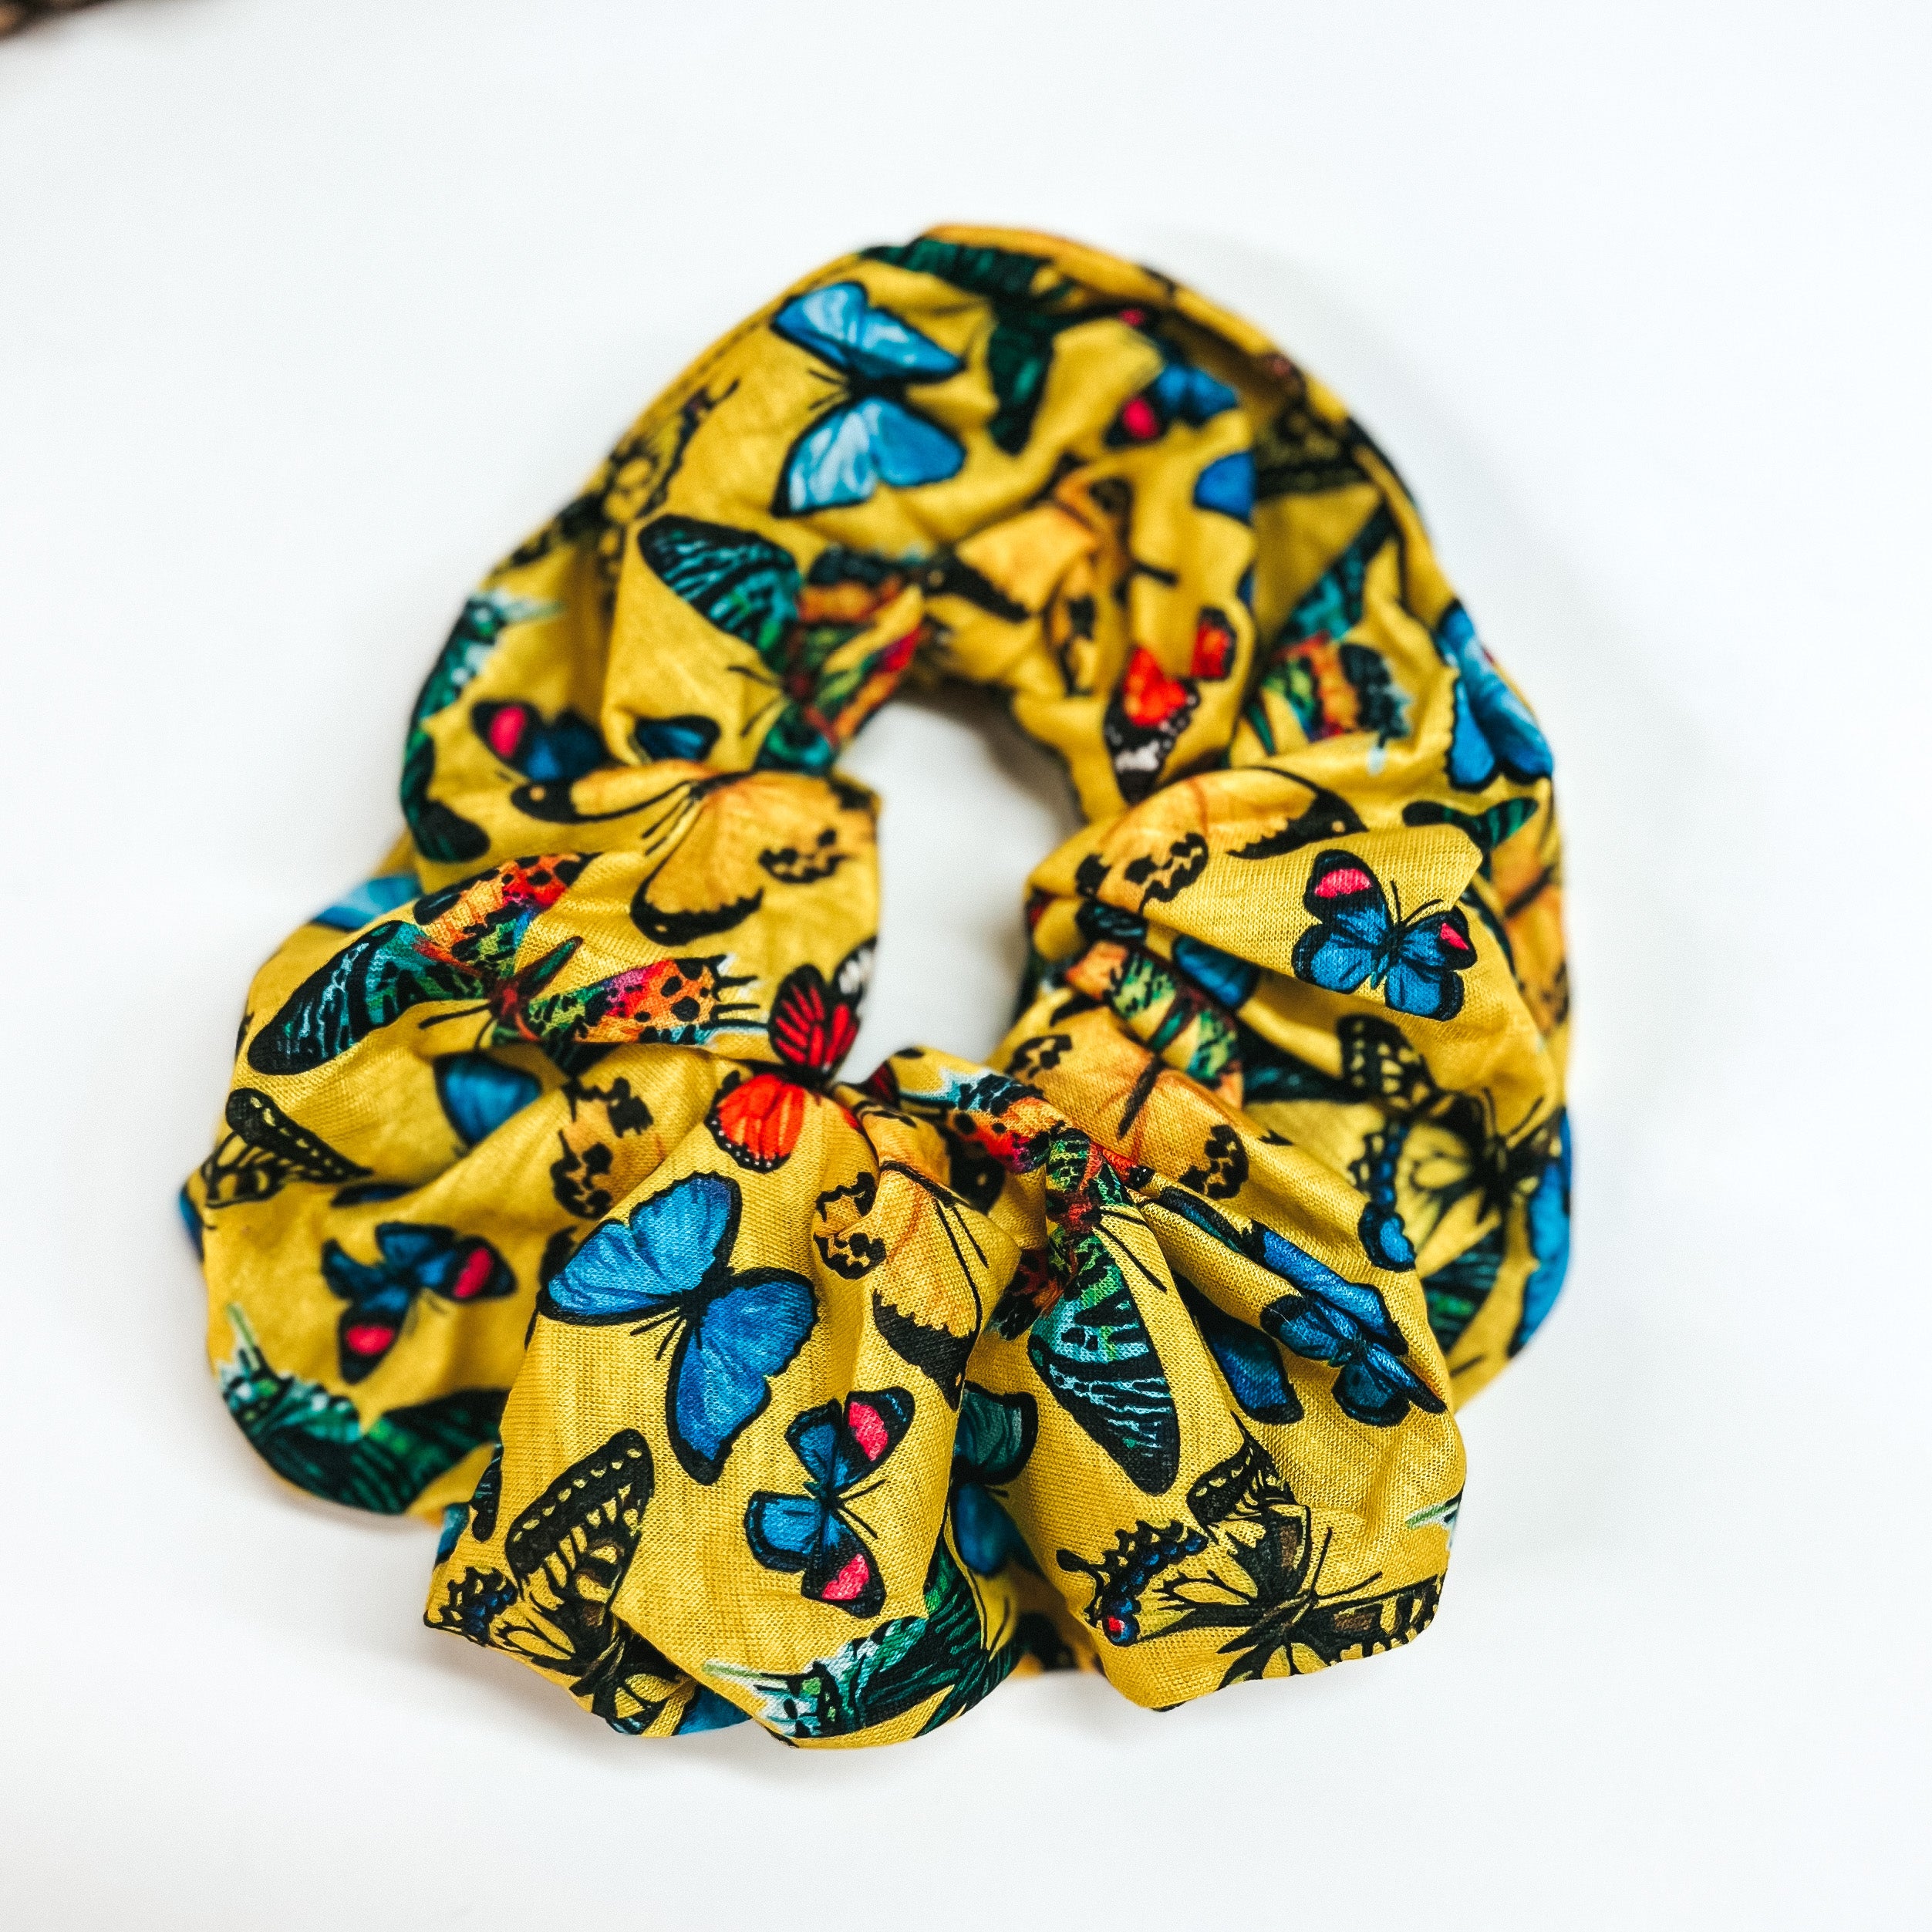 Butterfly Print Scrunchies in Assorted Colors - Giddy Up Glamour Boutique